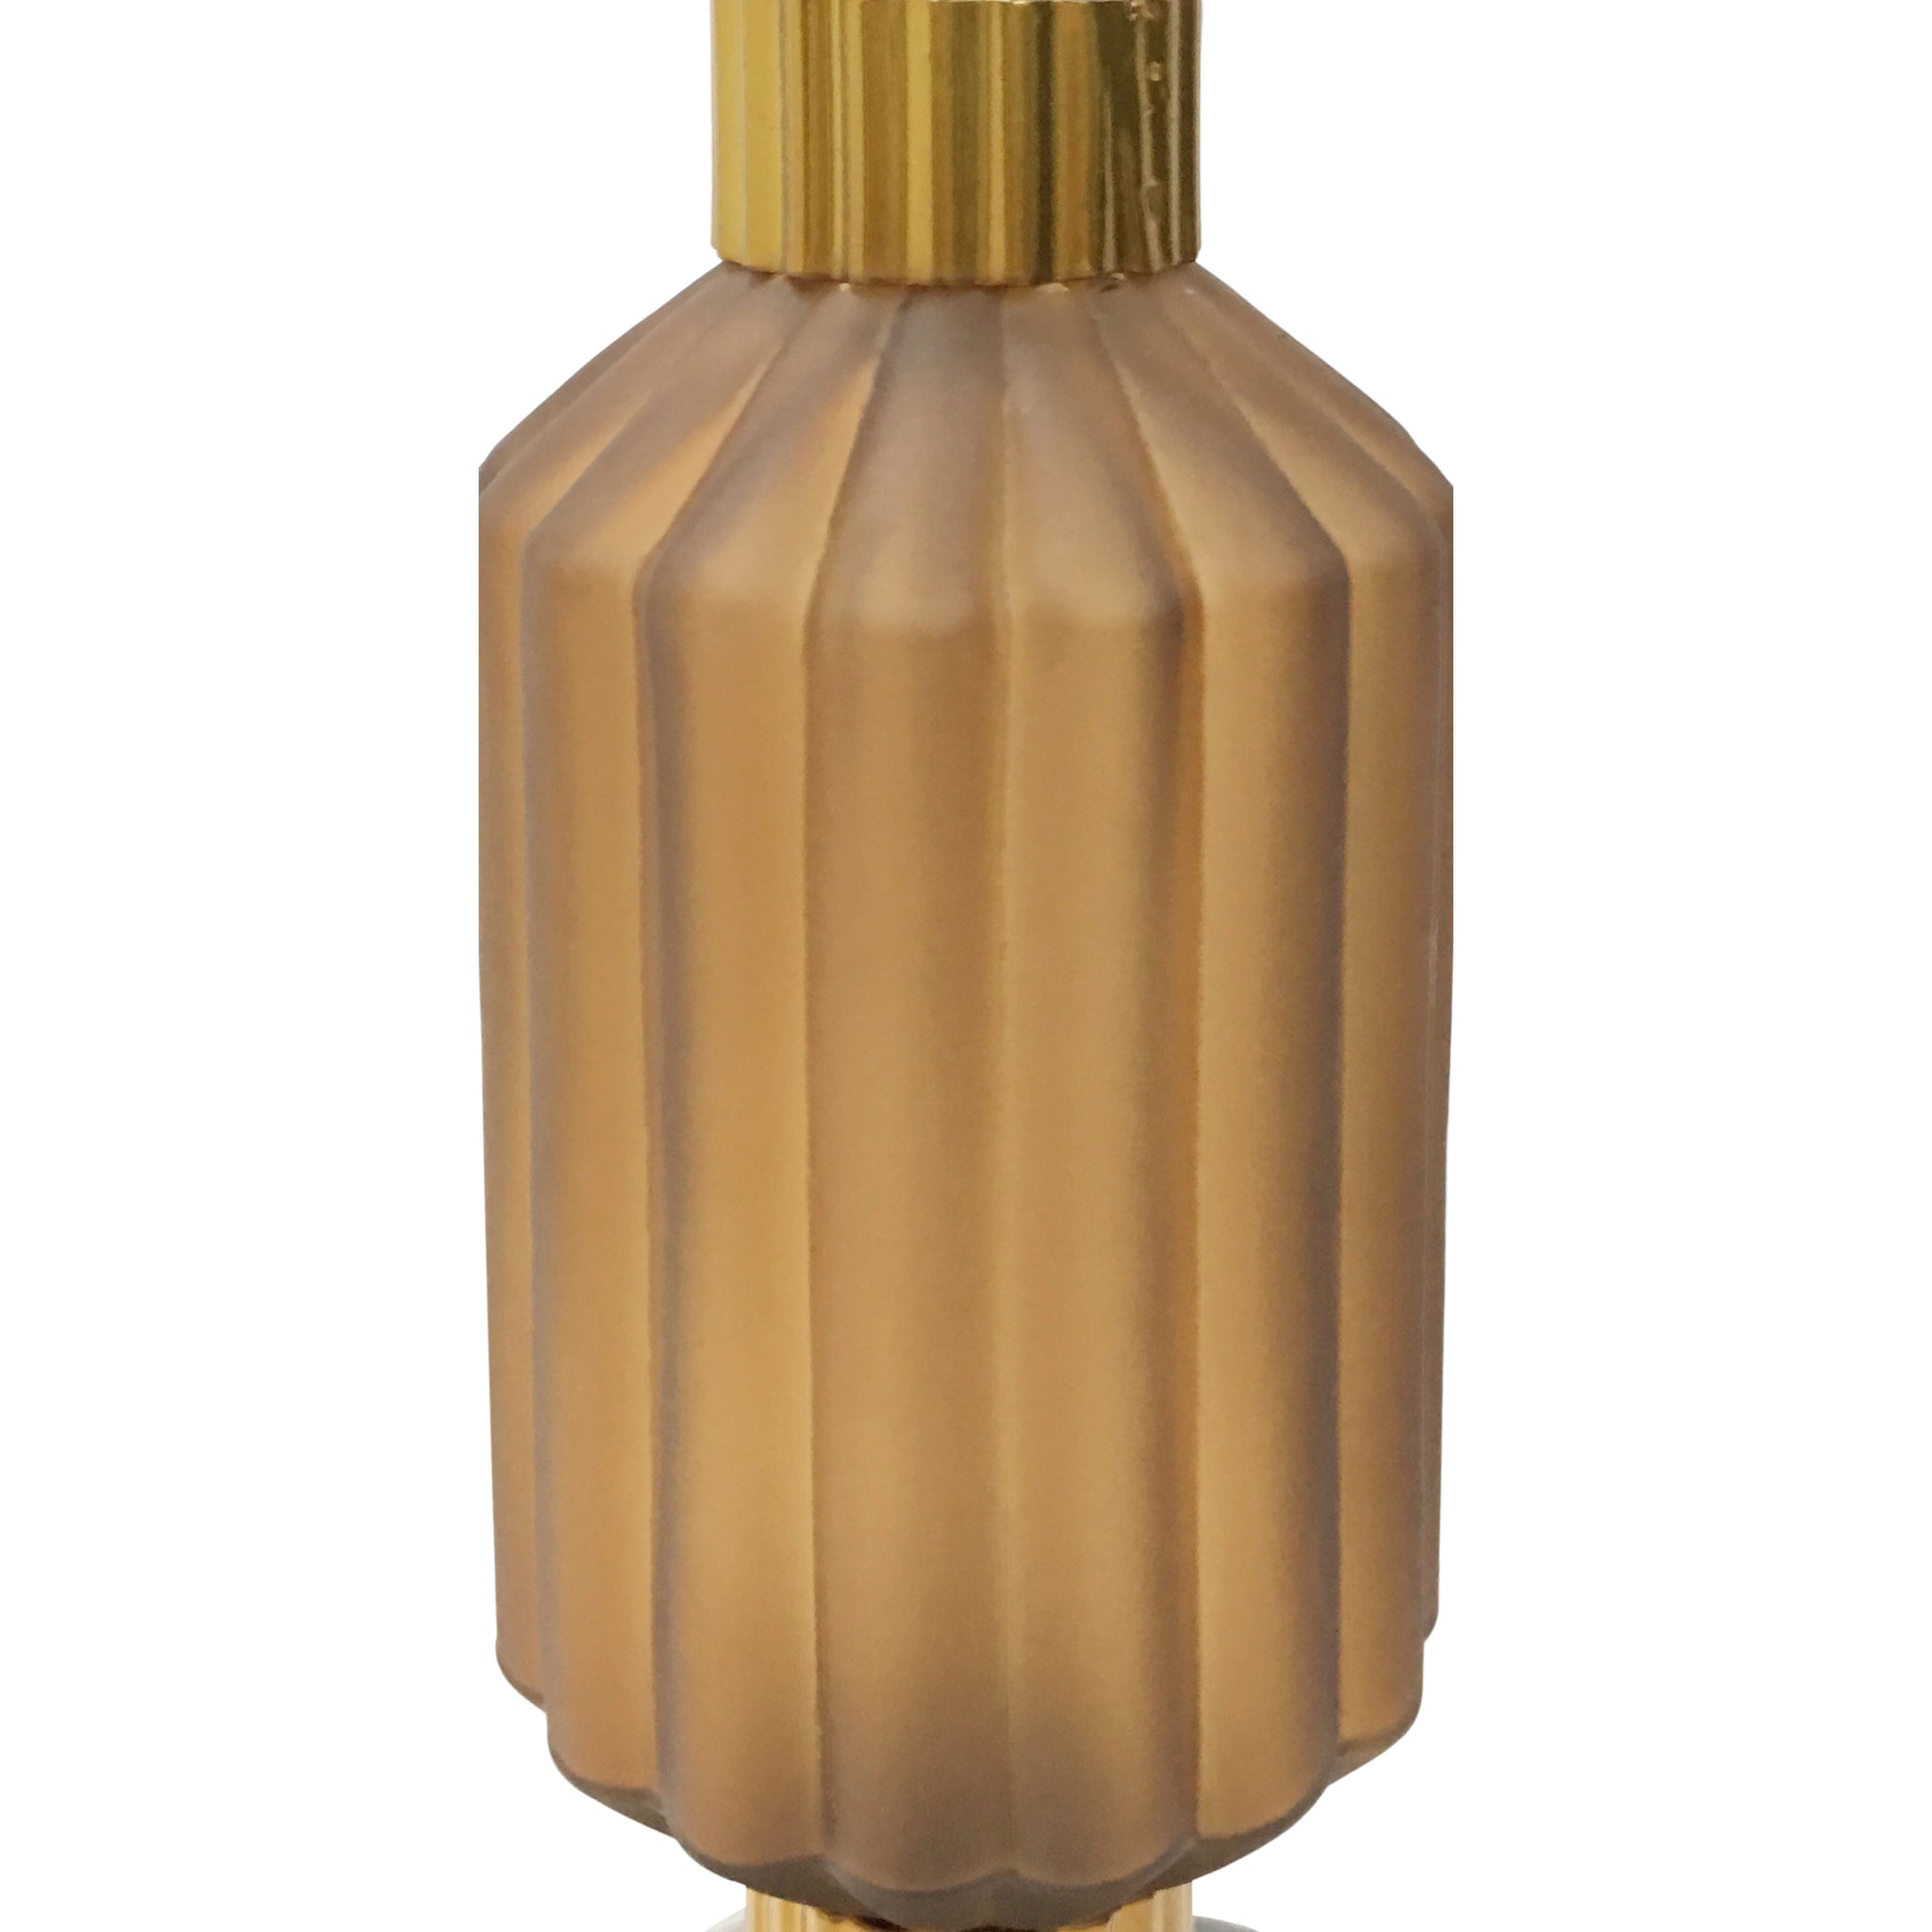 Arenal Buttermilk and frosted glass pendant E27 60W